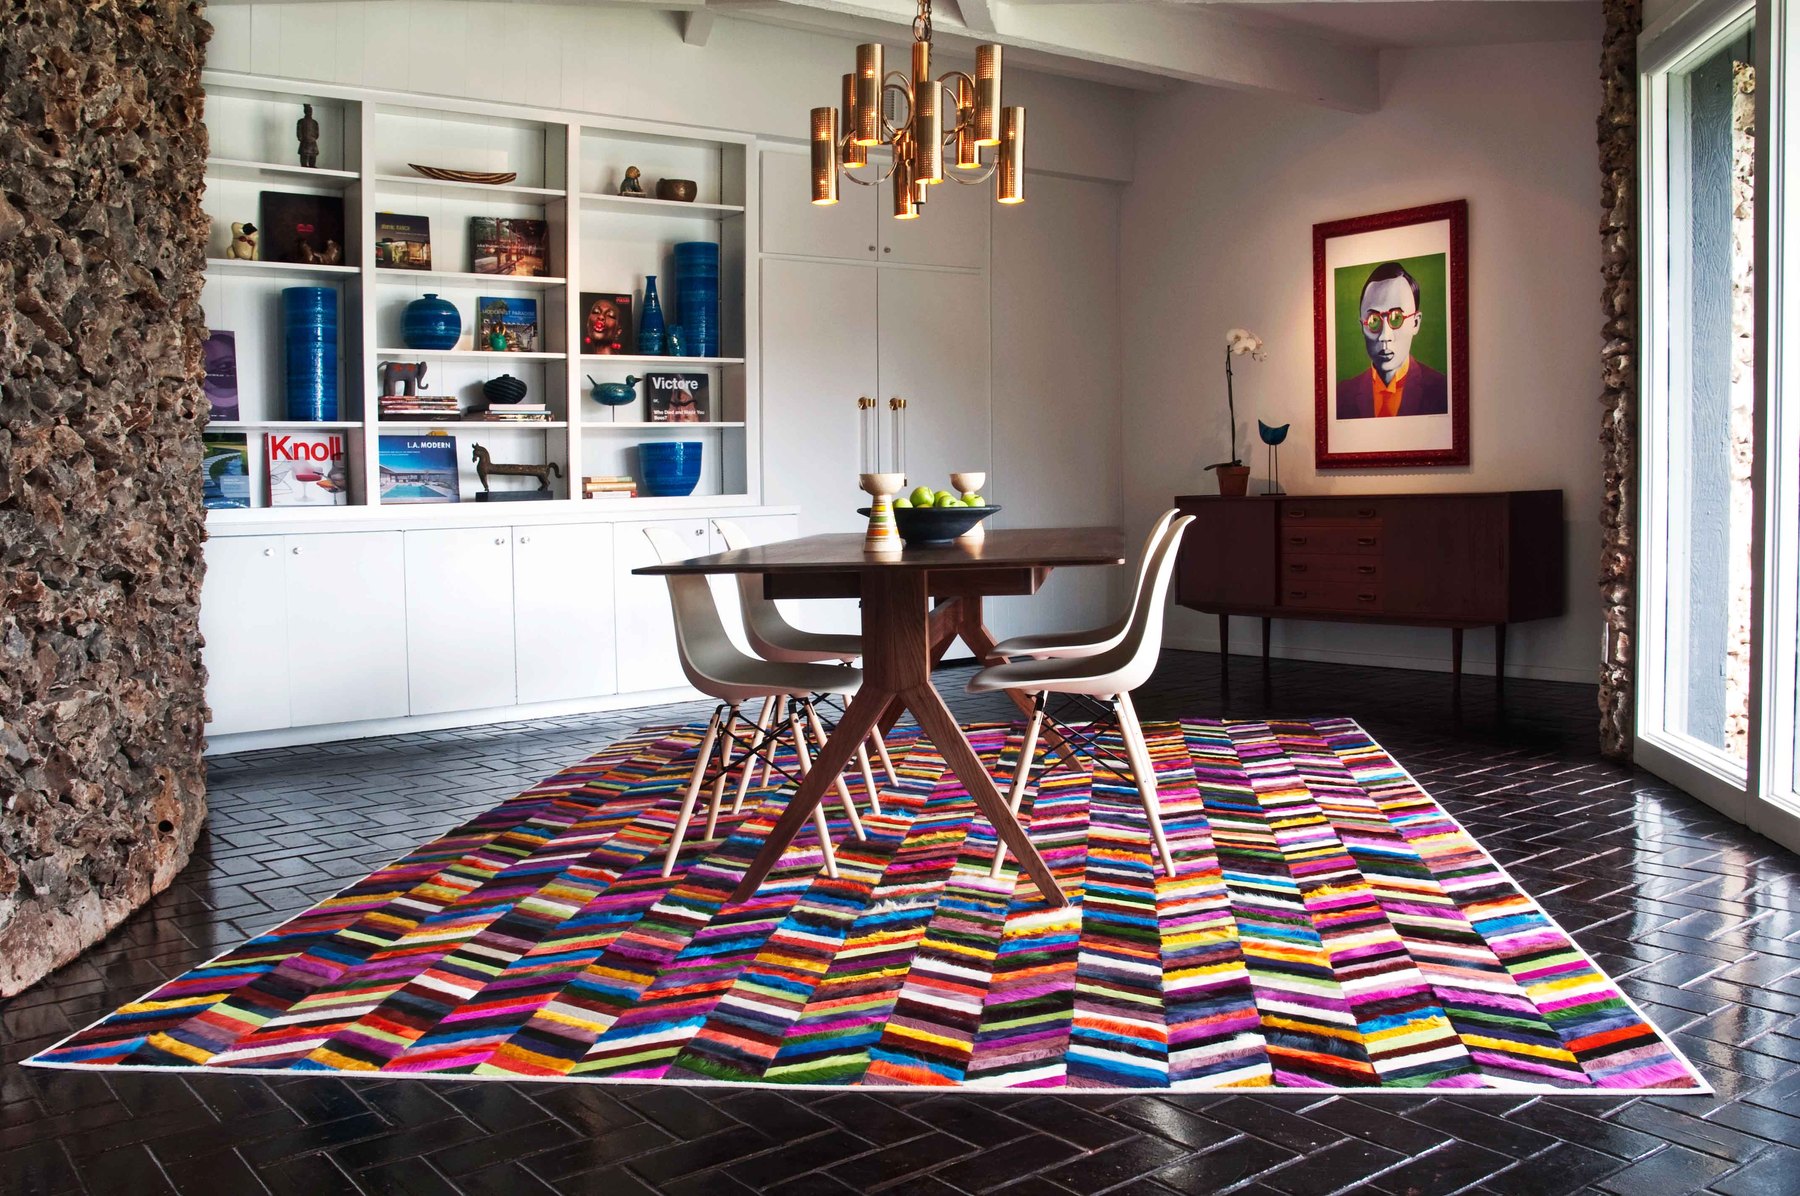 Contemporary-dining-room-with-a-rug-that-is-vibrant-and-alive